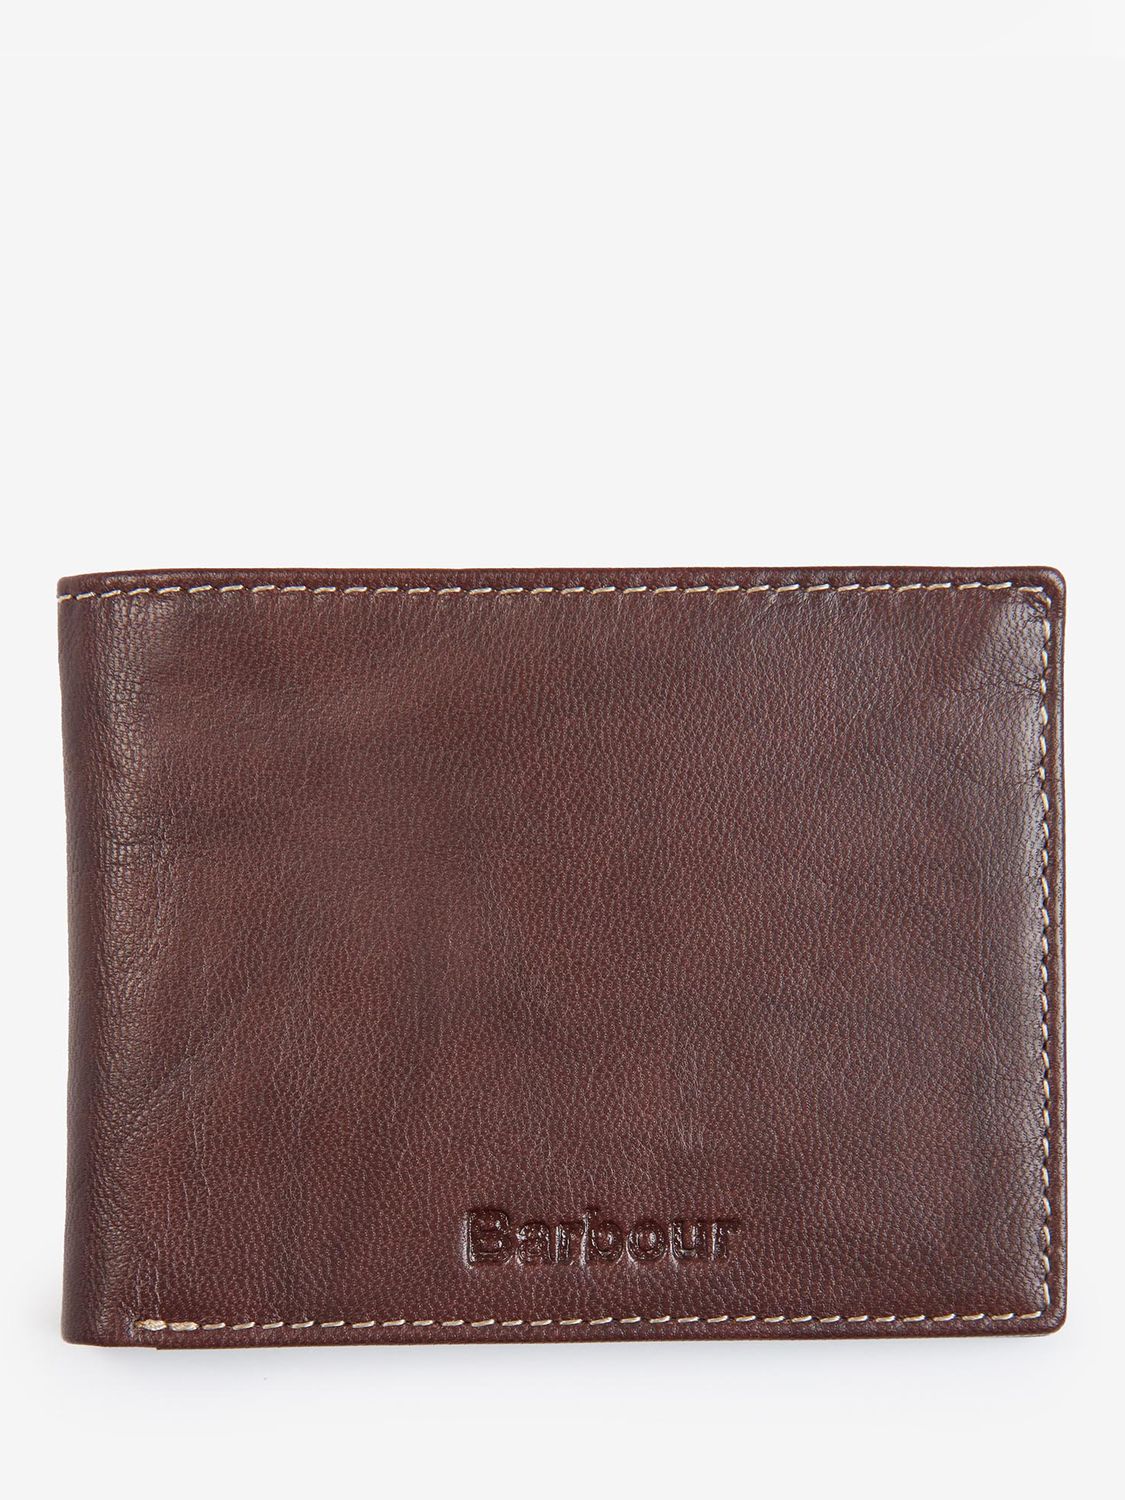 Barbour Crail Leather Wallet, Chestnut Brown at John Lewis & Partners